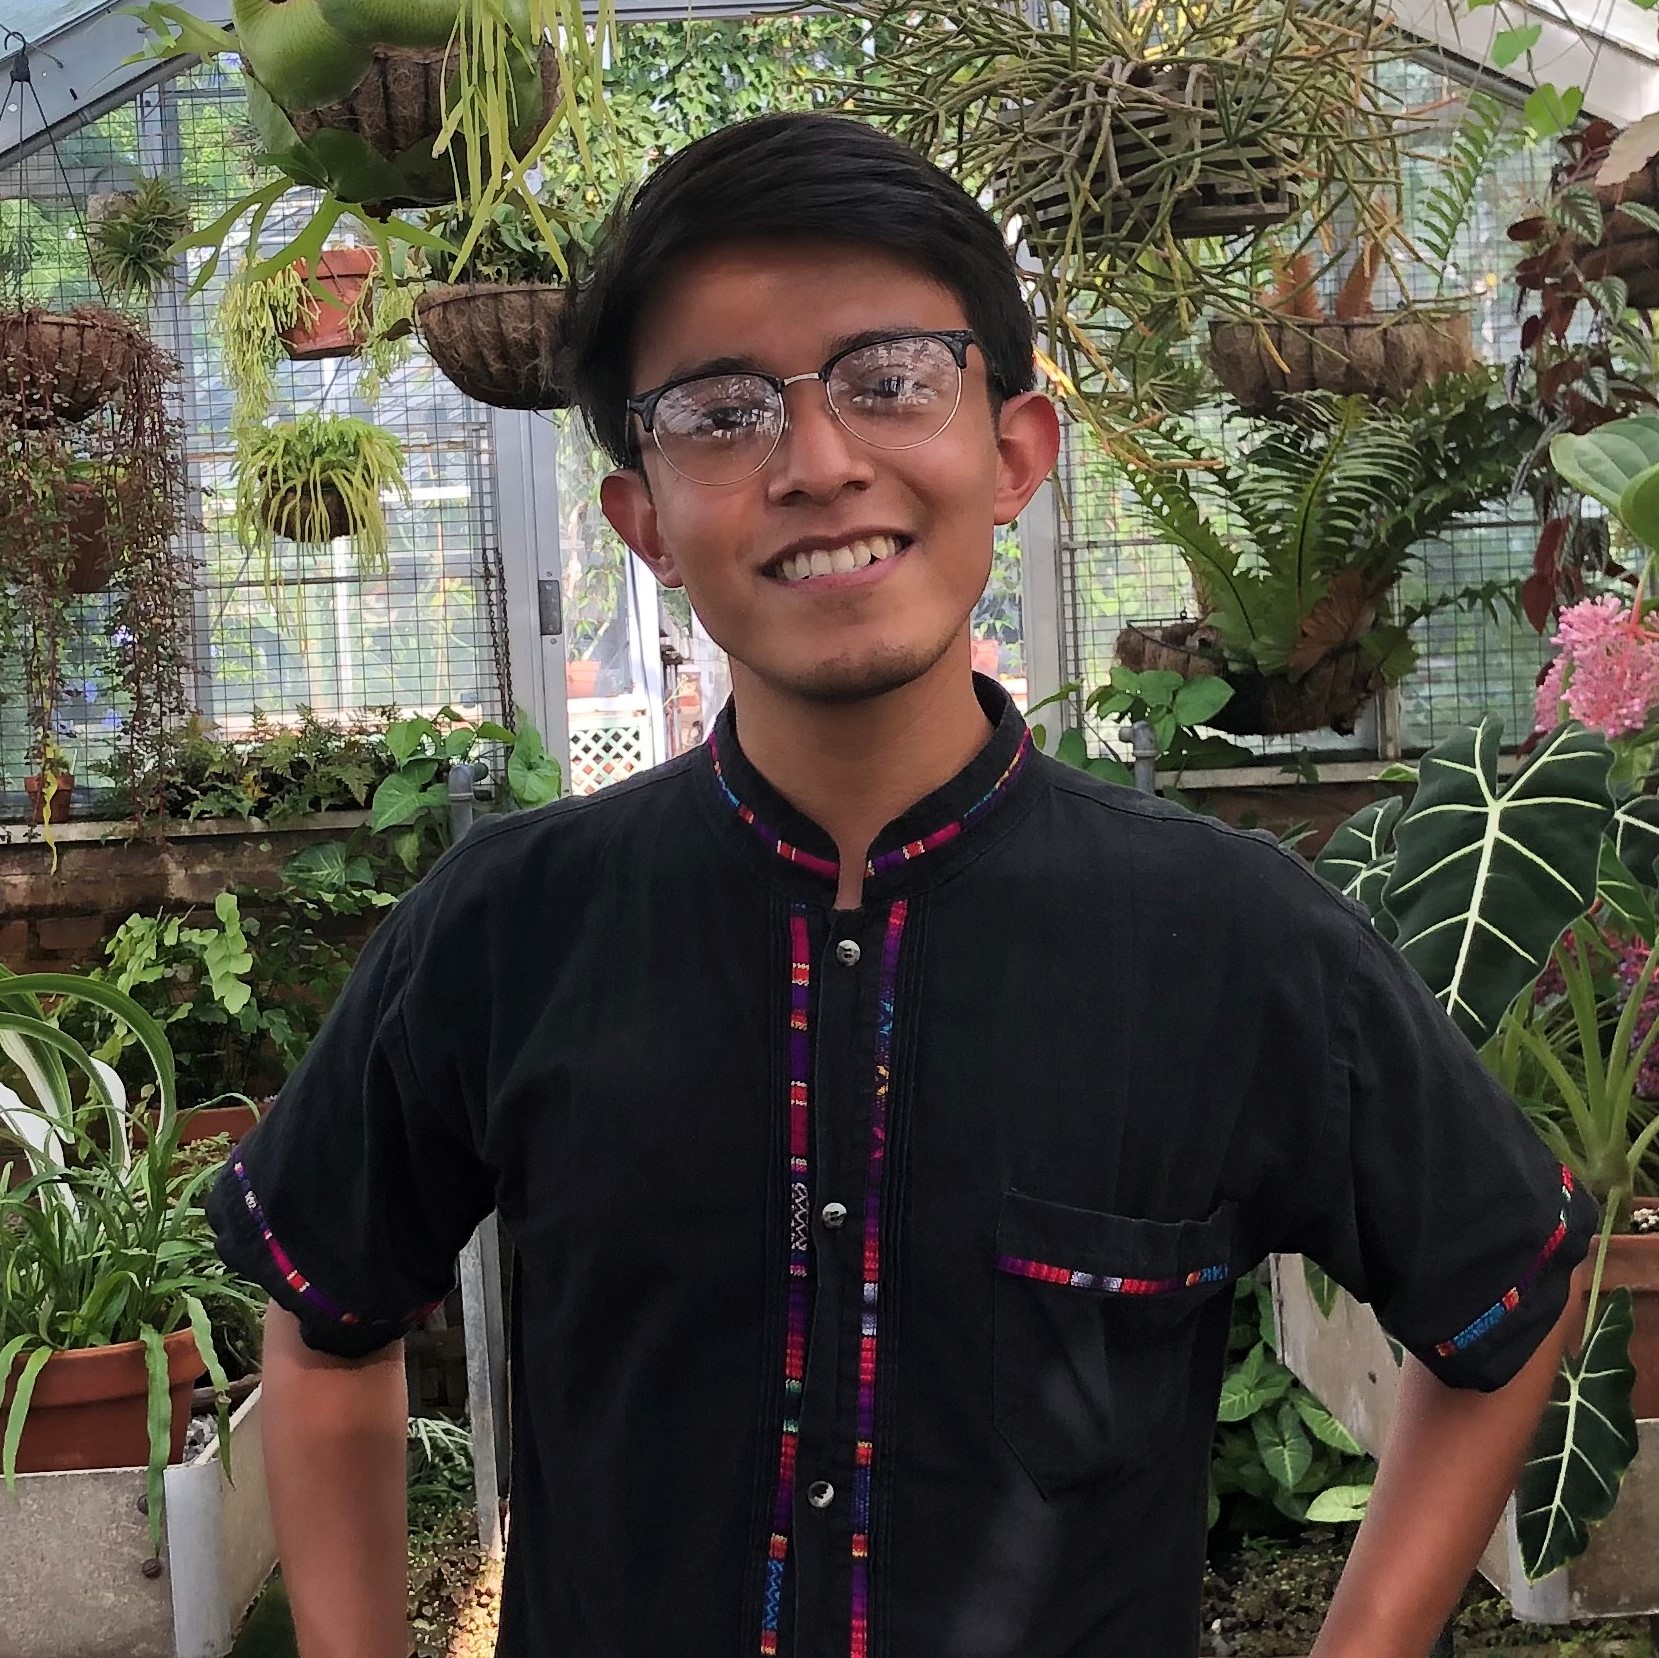 Alex stands in the center of the frame, smiling at the camera. His arms are placed on his hips. Behind him is a room filled with a variety of different plants.